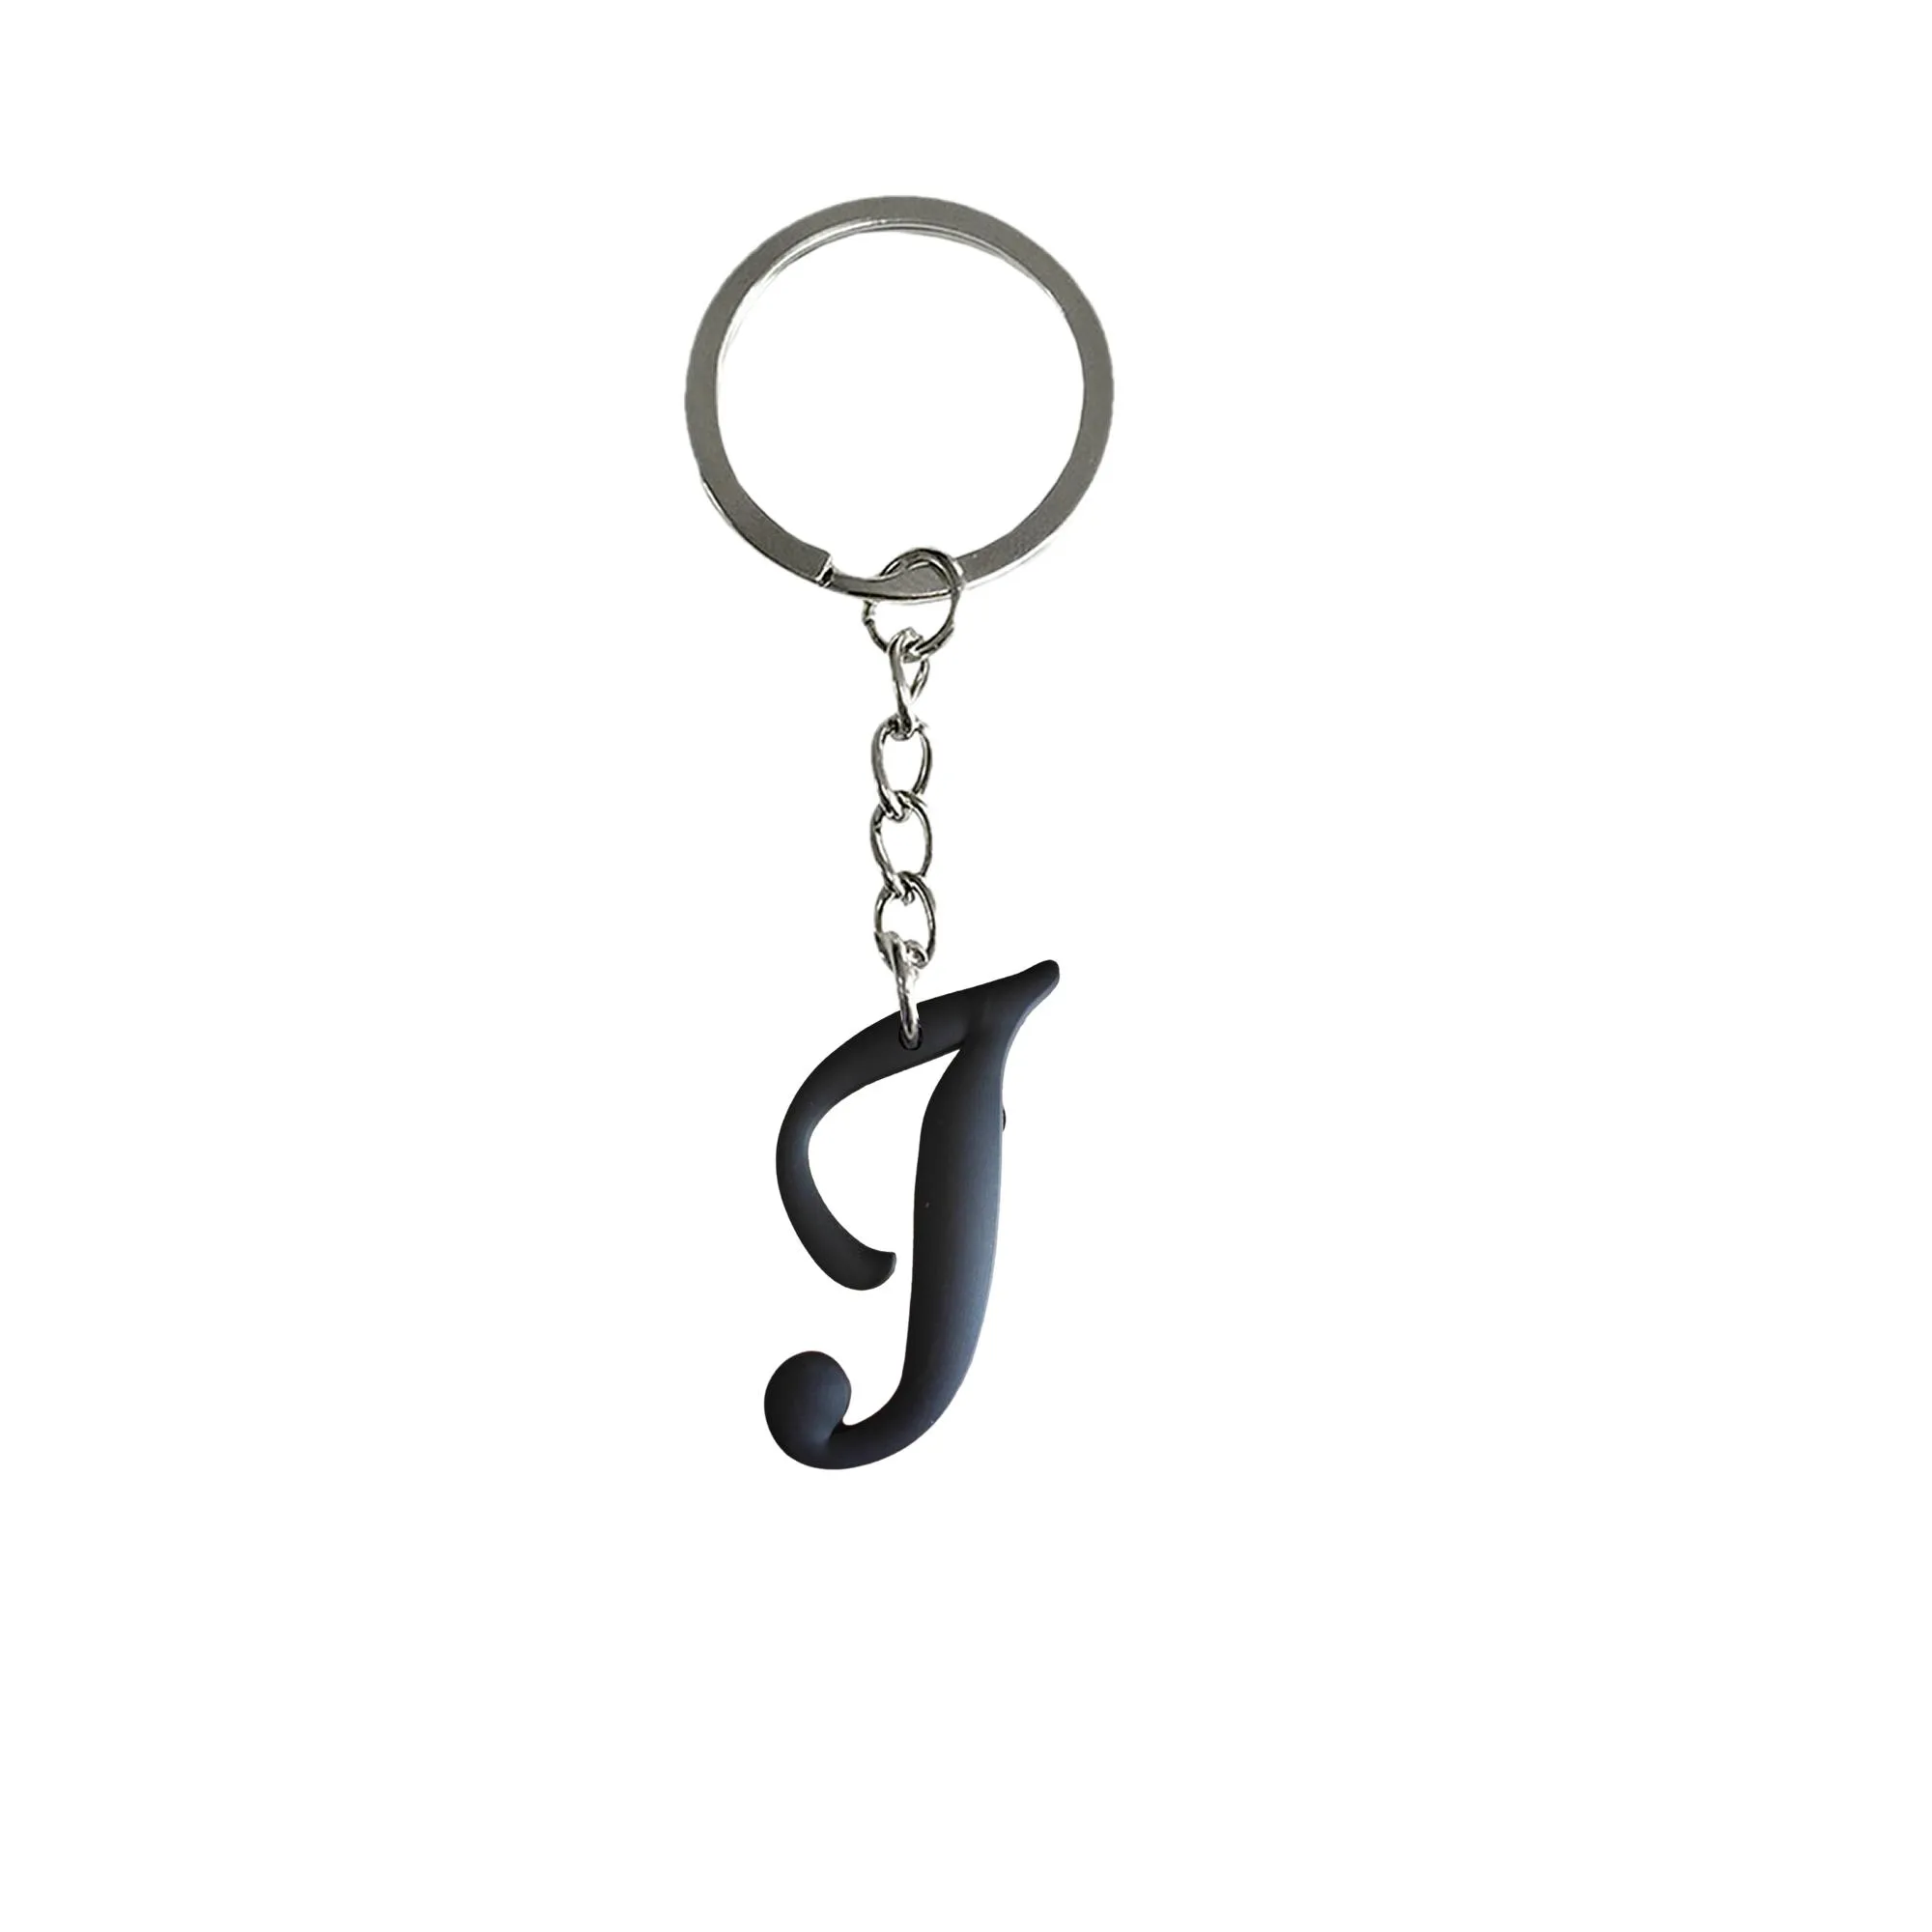 black large letters keychain keyring for school bags backpack key ring boys keychains tags goodie bag stuffer christmas gifts and holiday charms suitable schoolbag women stuffers supplies car